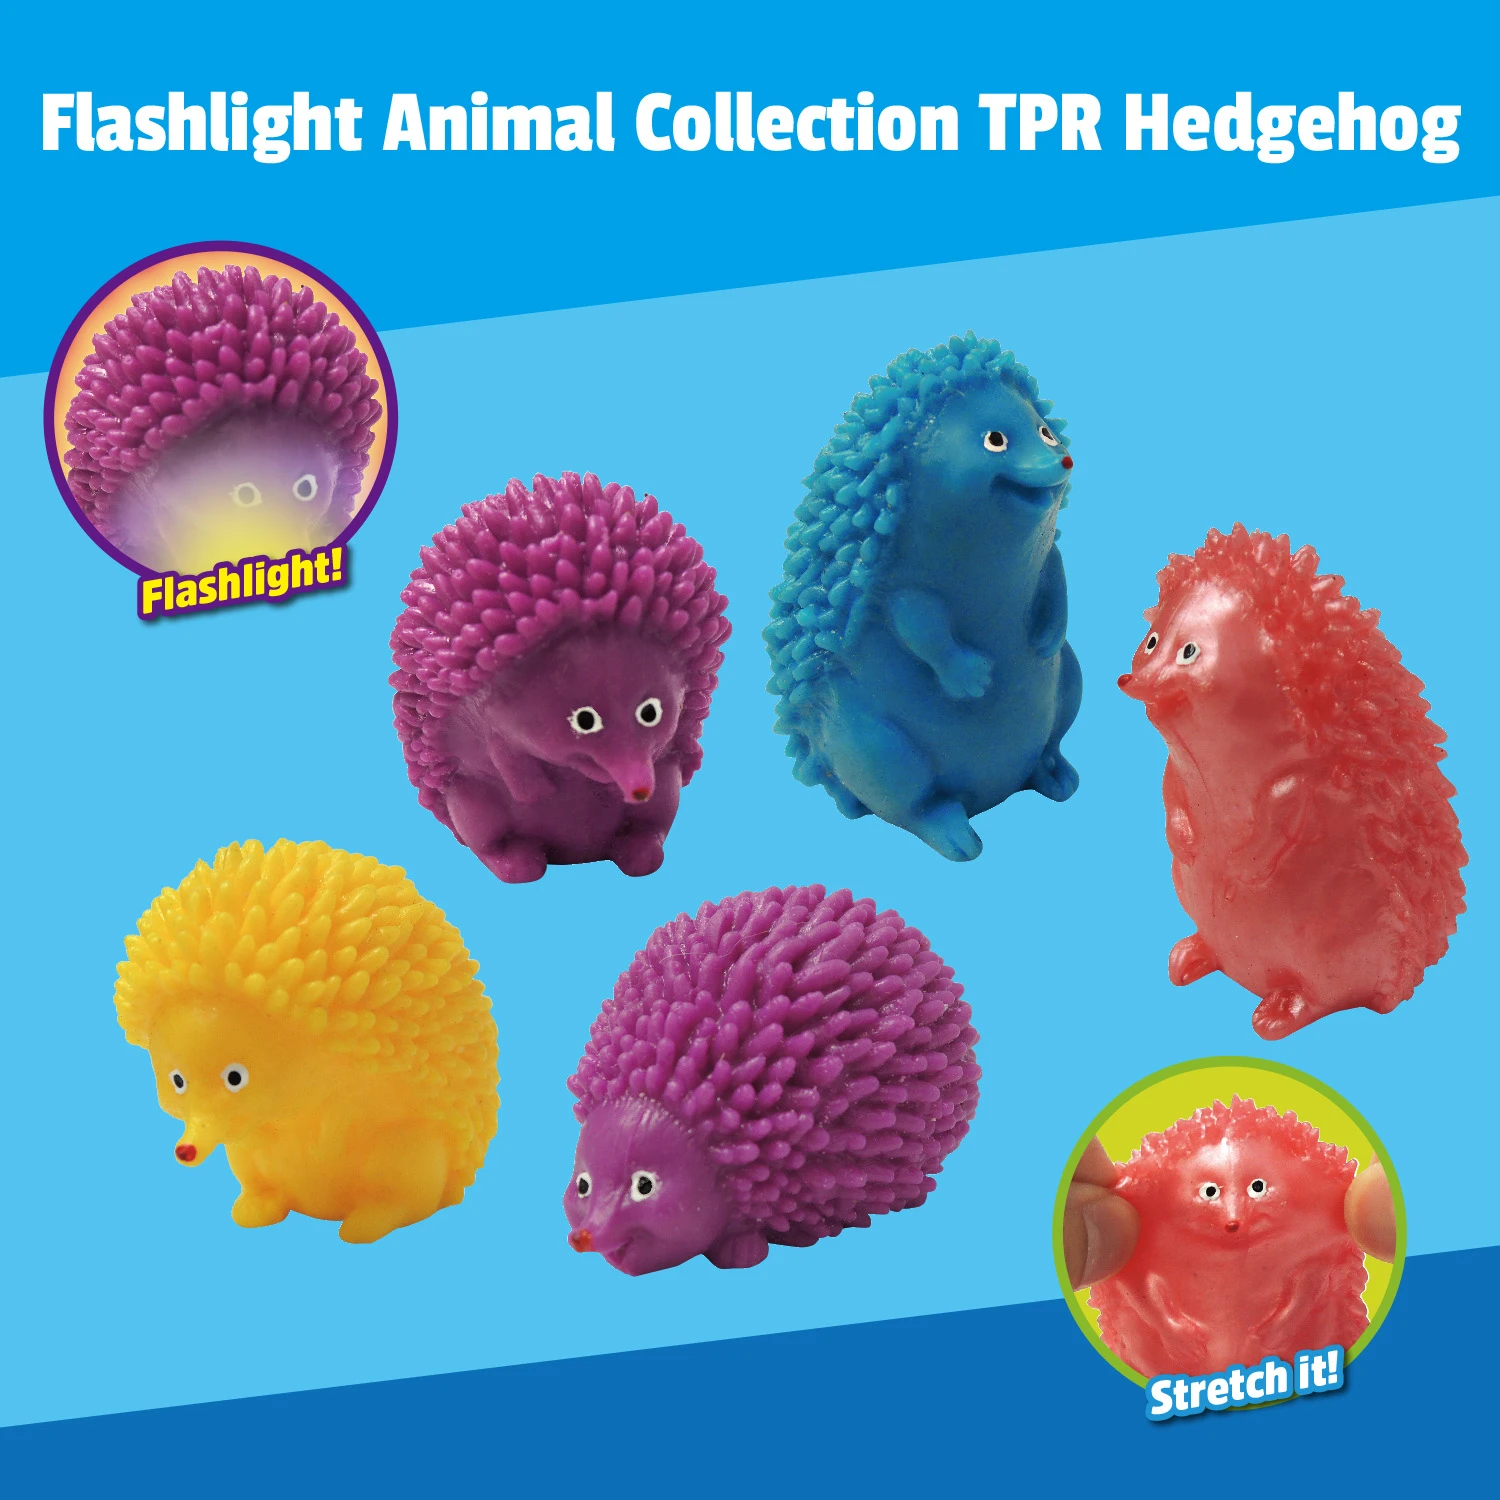 OEM wholesale Promotion Small Squeeze Stretchy Soft Plastic Toy Cute Kawaii Design Flashlight Animal Collection TPR Hedgehog